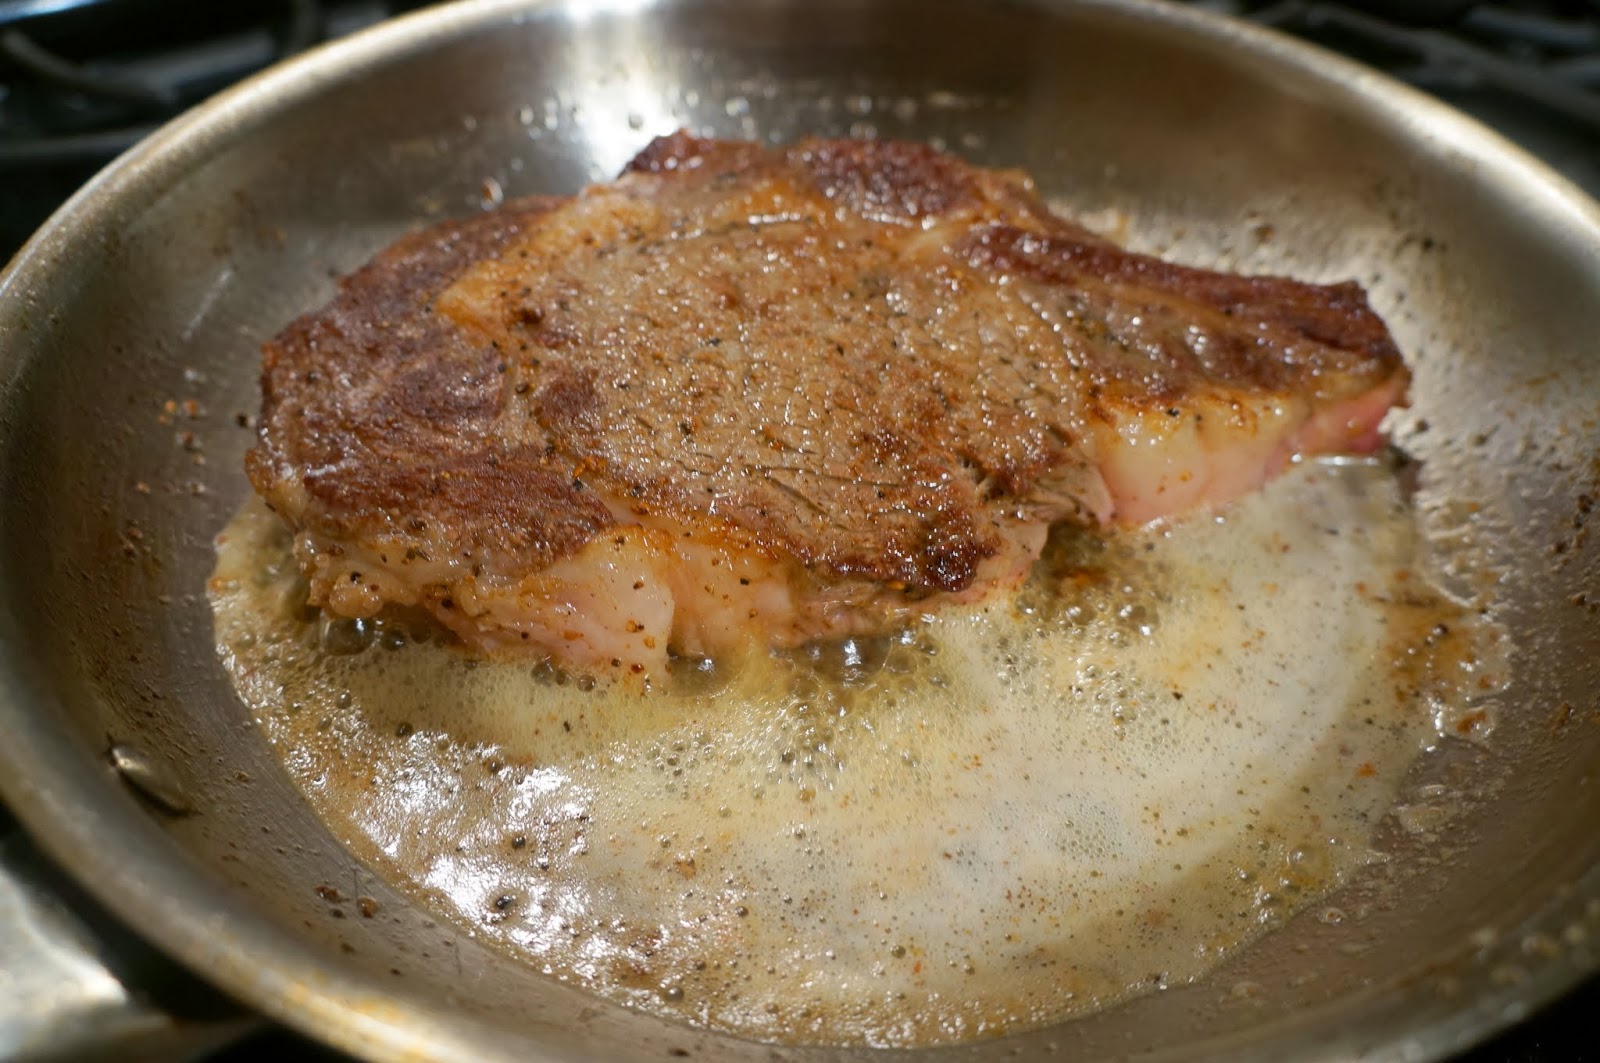 What I Ate: Butter-Basted Steak